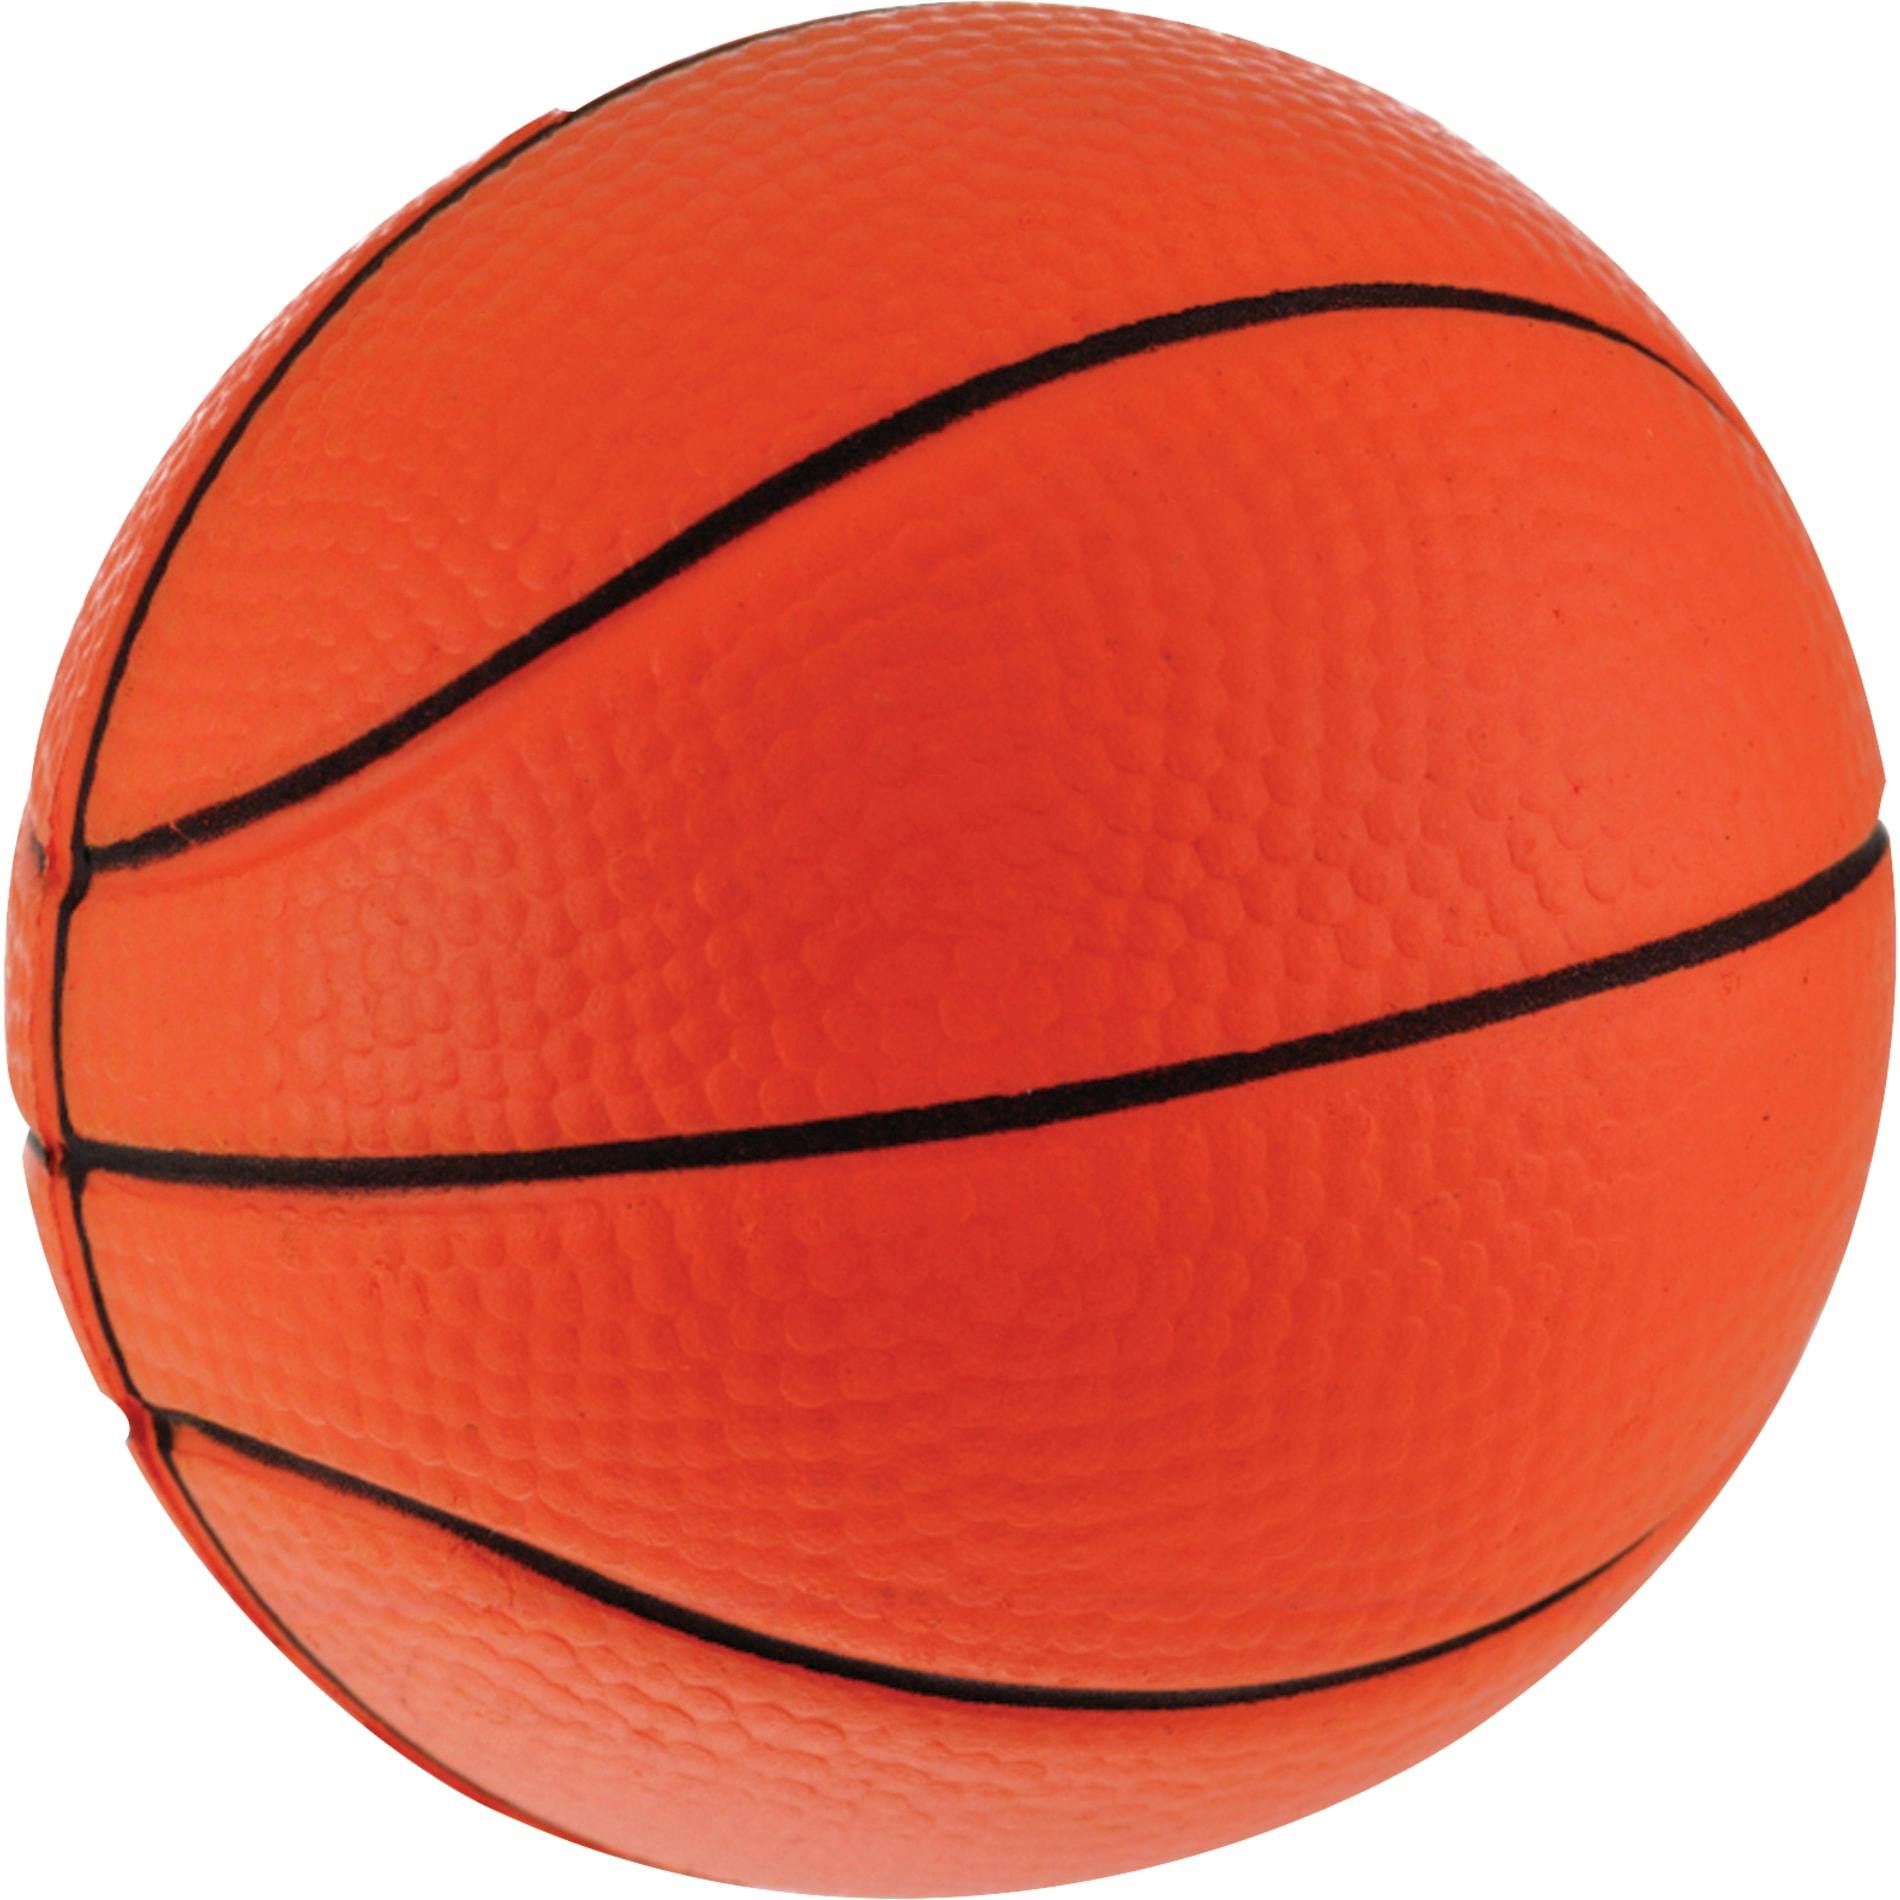 Basketball Stress Reliever - additional Image 1